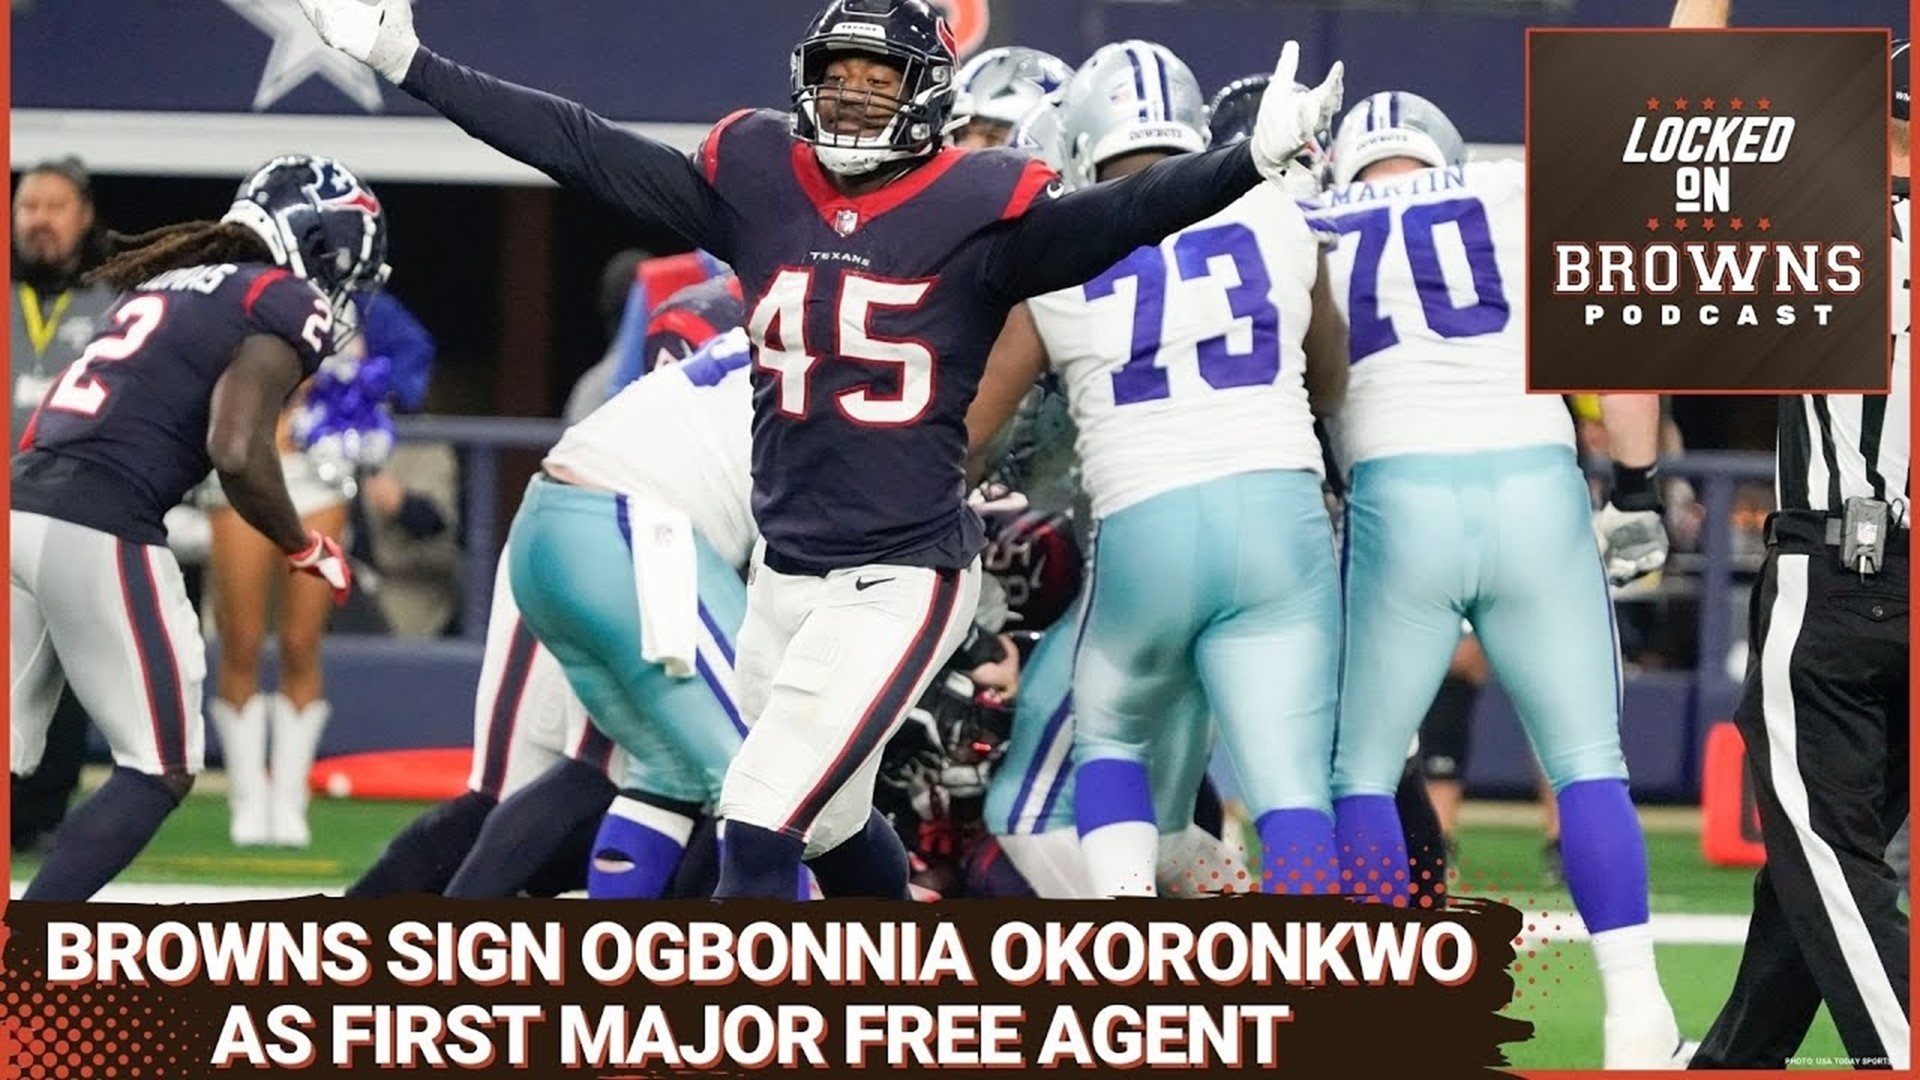 In this Instant Reaction, we take a look at the Browns Ogbonnia Okoronkwo Free Agent Signing. We discuss the players strengths and weaknesses.